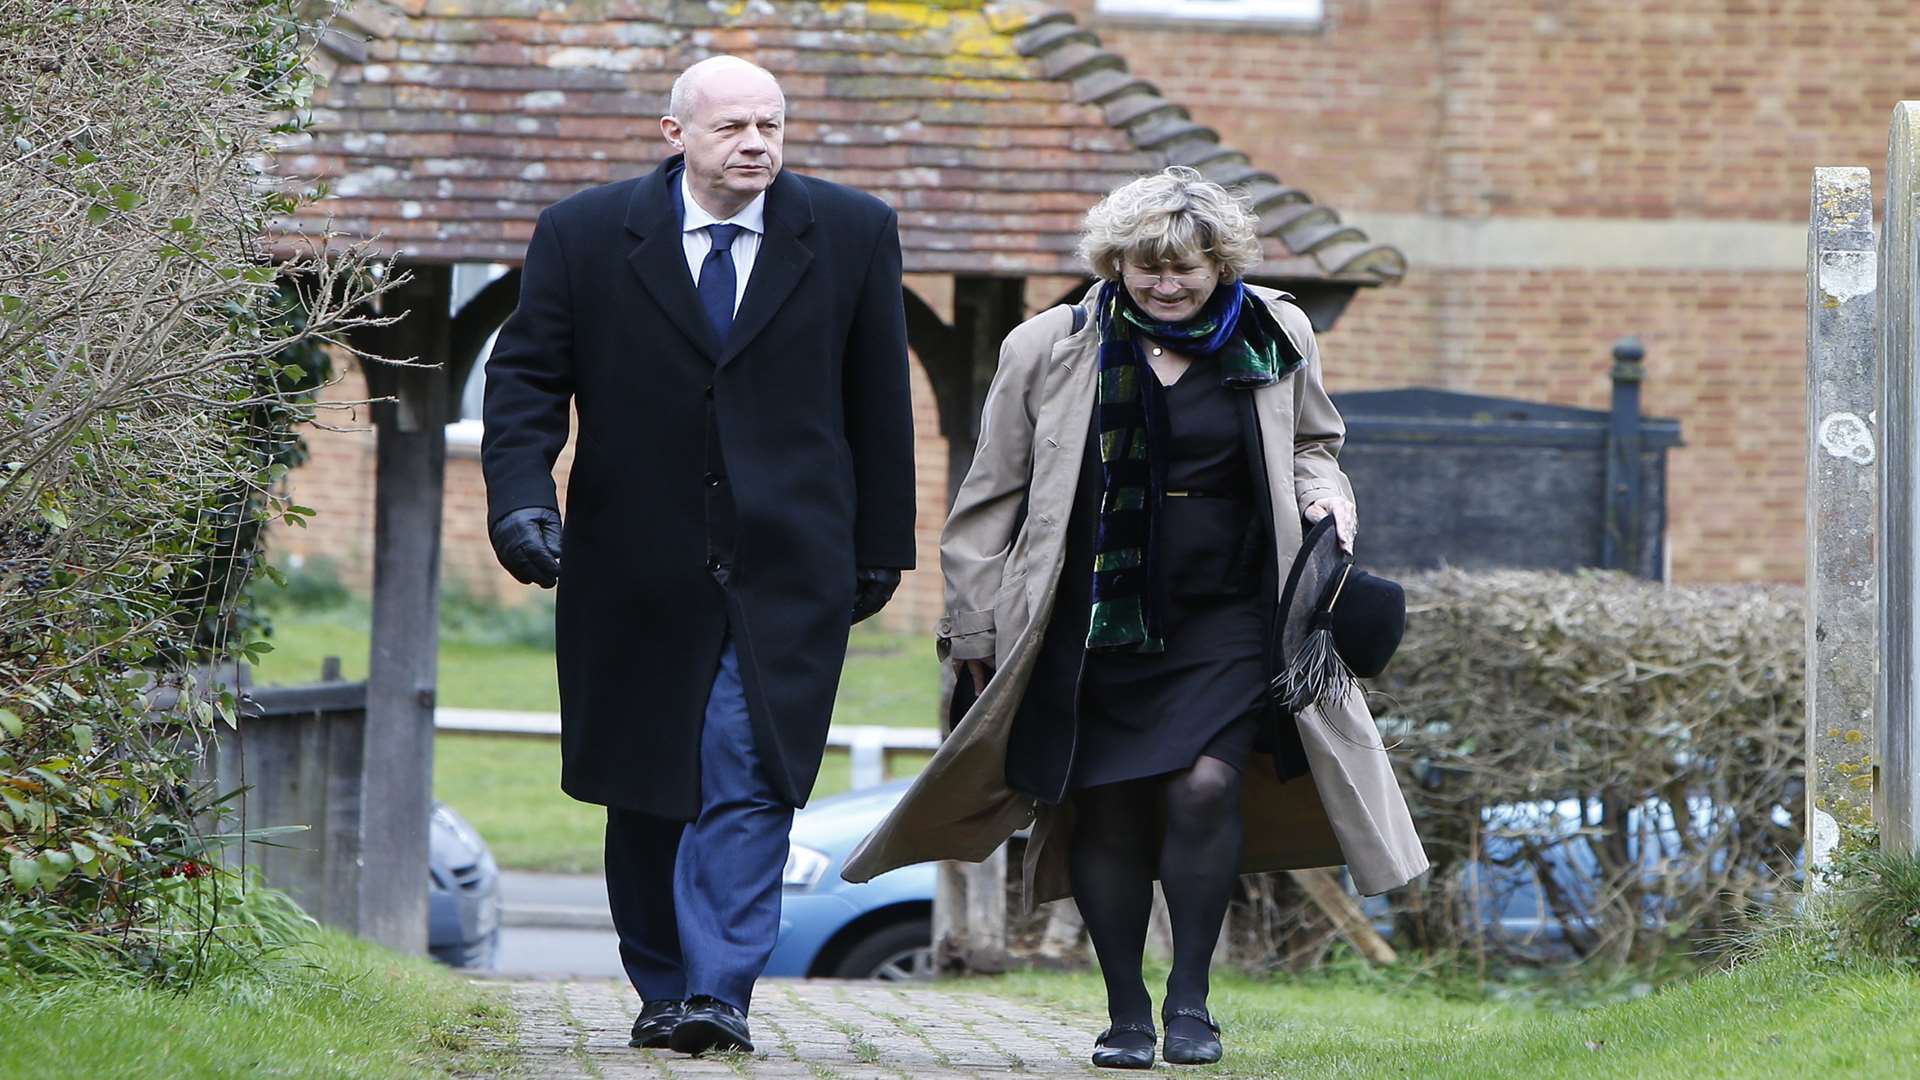 MP Damian Green arrives with wife Alicia Collinson. Picture: Andy Jones